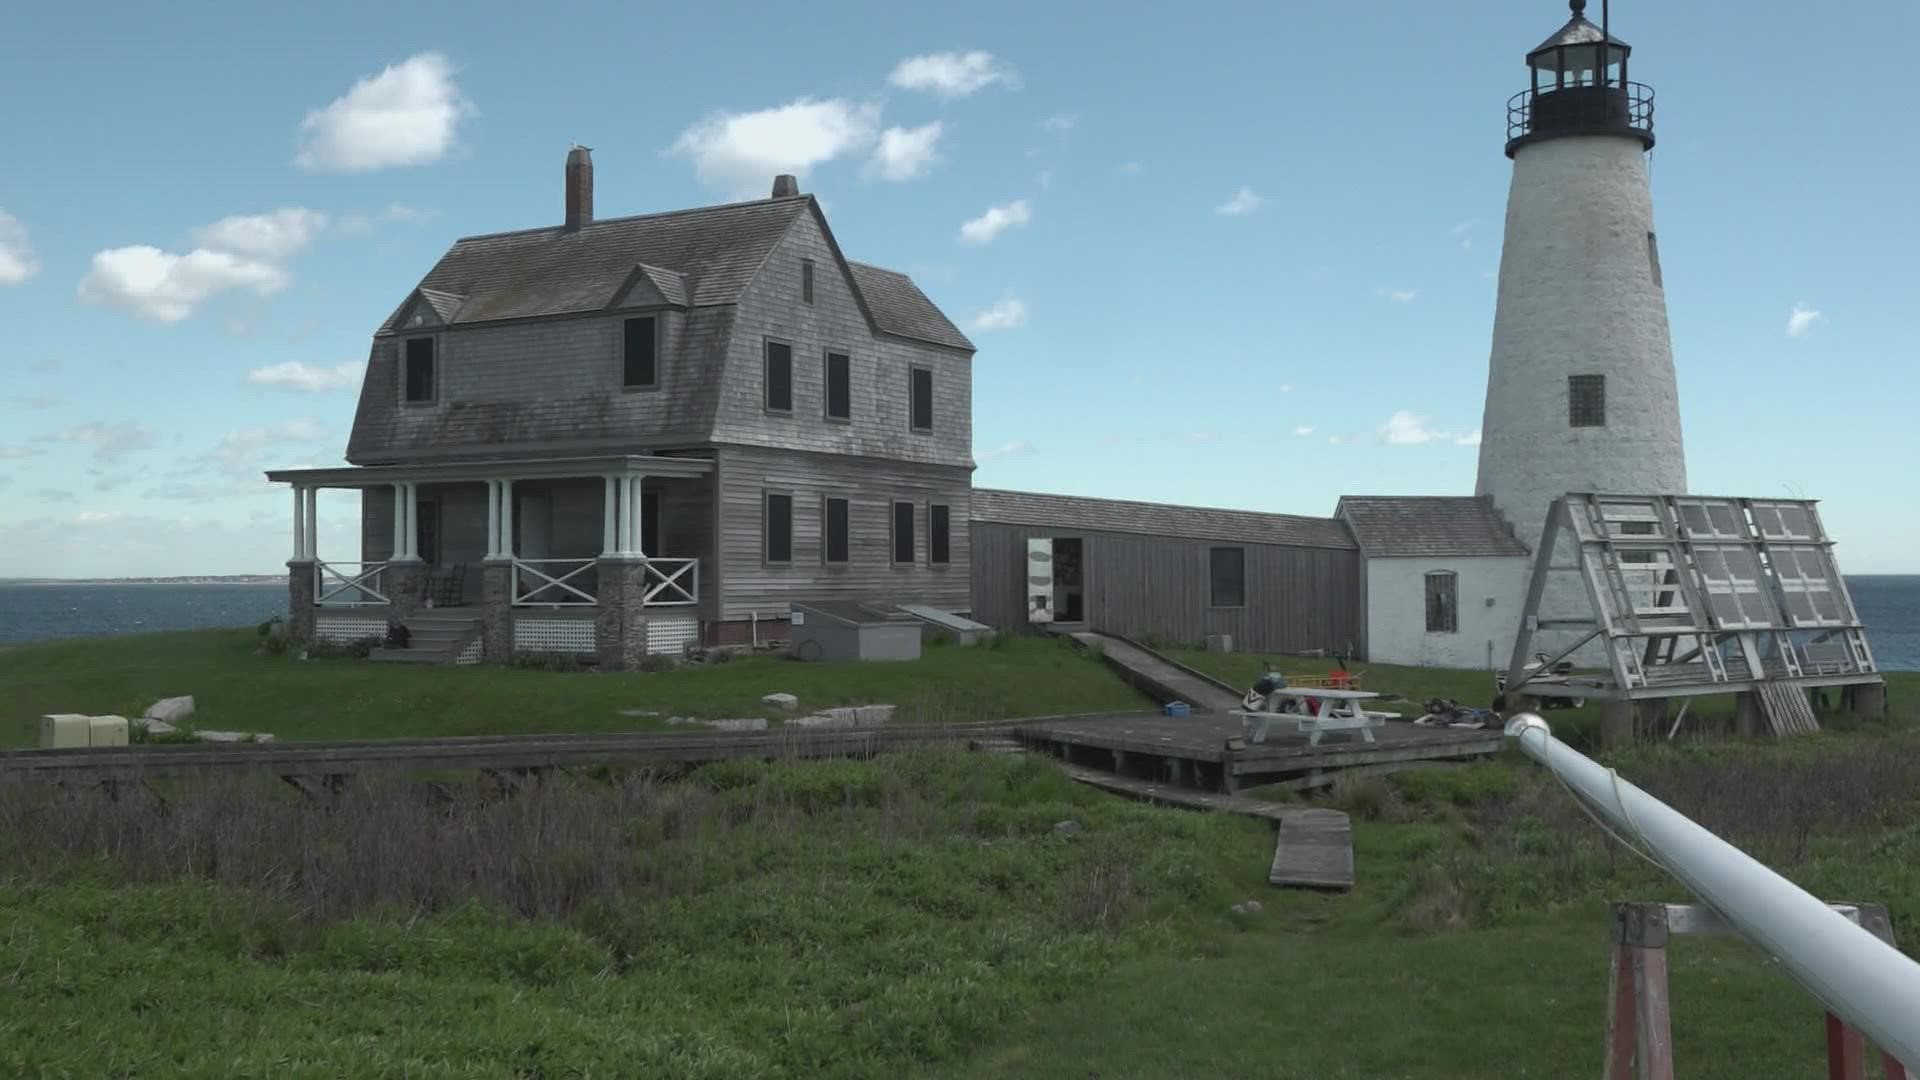 The friends of Wood Island Lighthouse have been working since 2003 to restore the lighthouse and preserve its history.